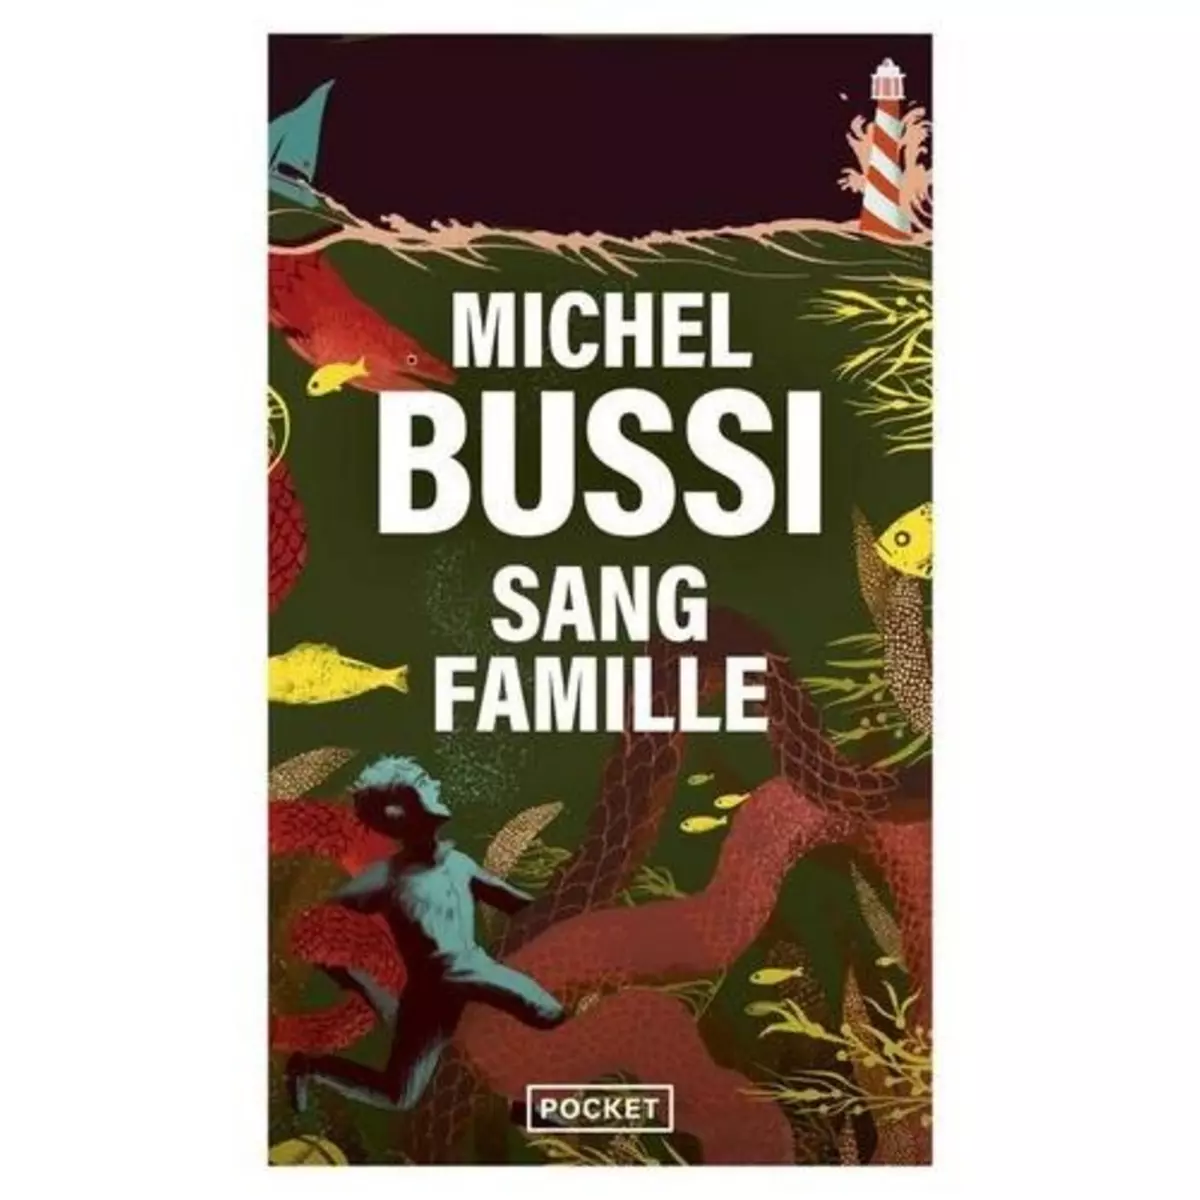  SANG FAMILLE, Bussi Michel